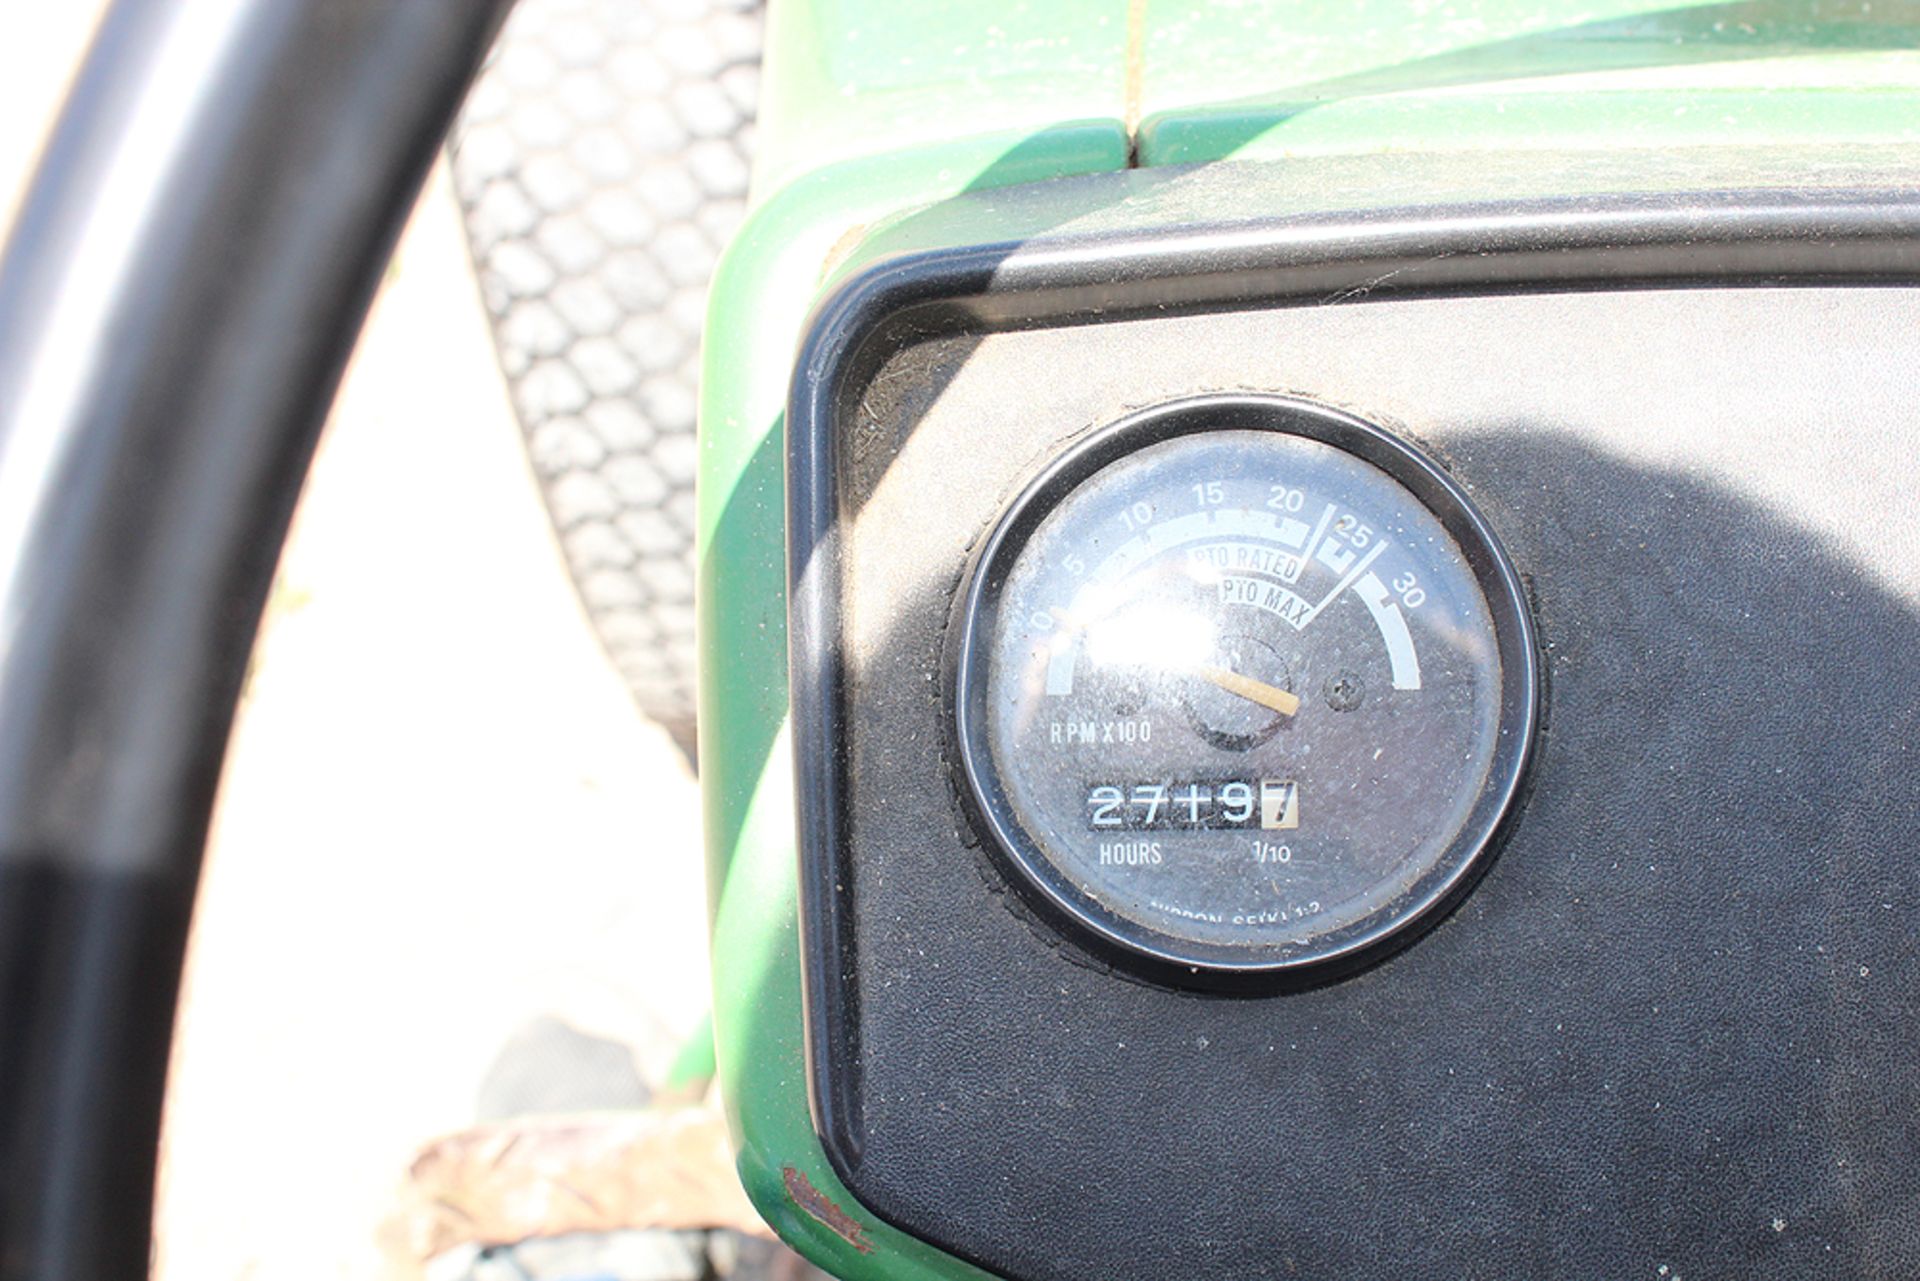 JOHN DEERE 750 DIESEL TRACTOR WITH 3 PT., PTO, 2719 HOURS WITH TURF TIRES - Image 2 of 4